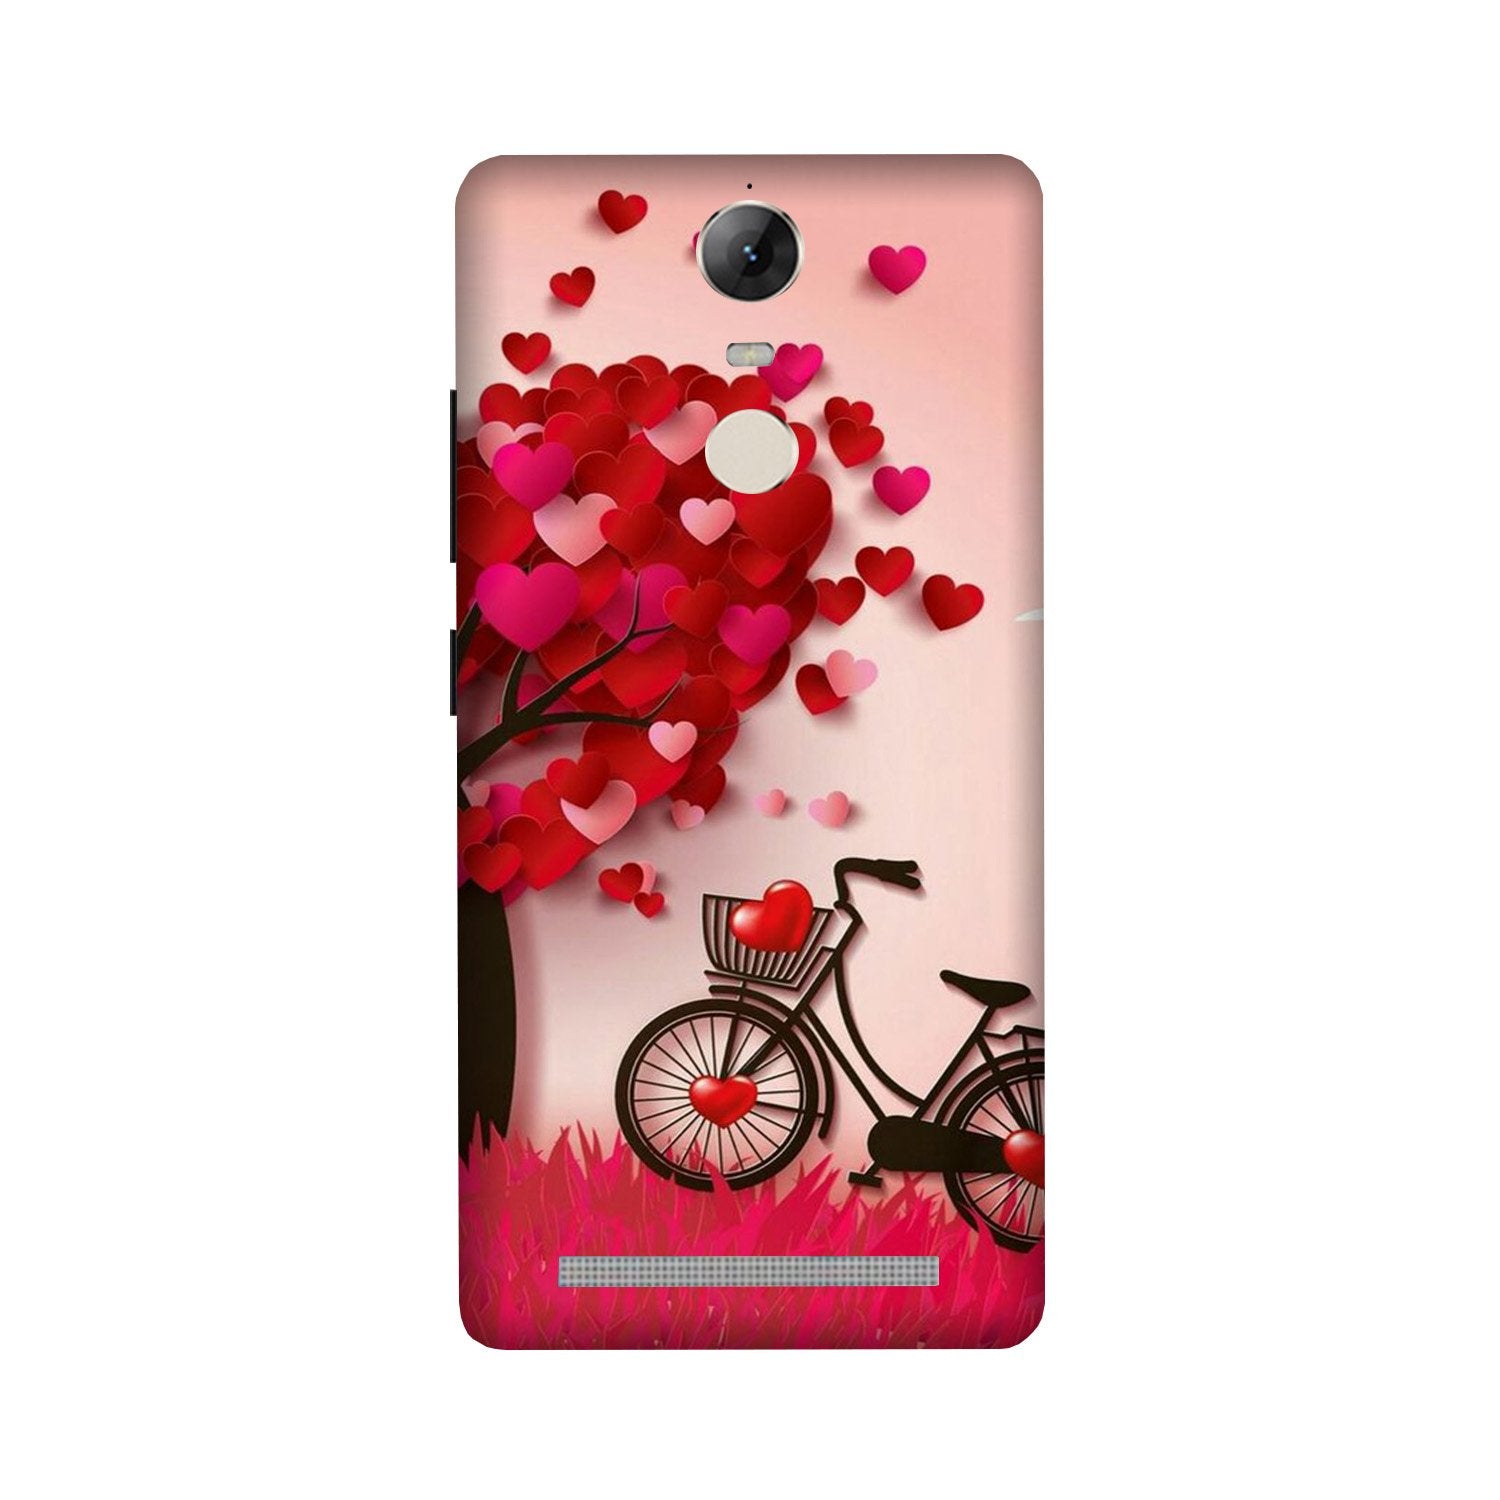 Red Heart Cycle Case for Lenovo Vibe K5 Note (Design No. 222)